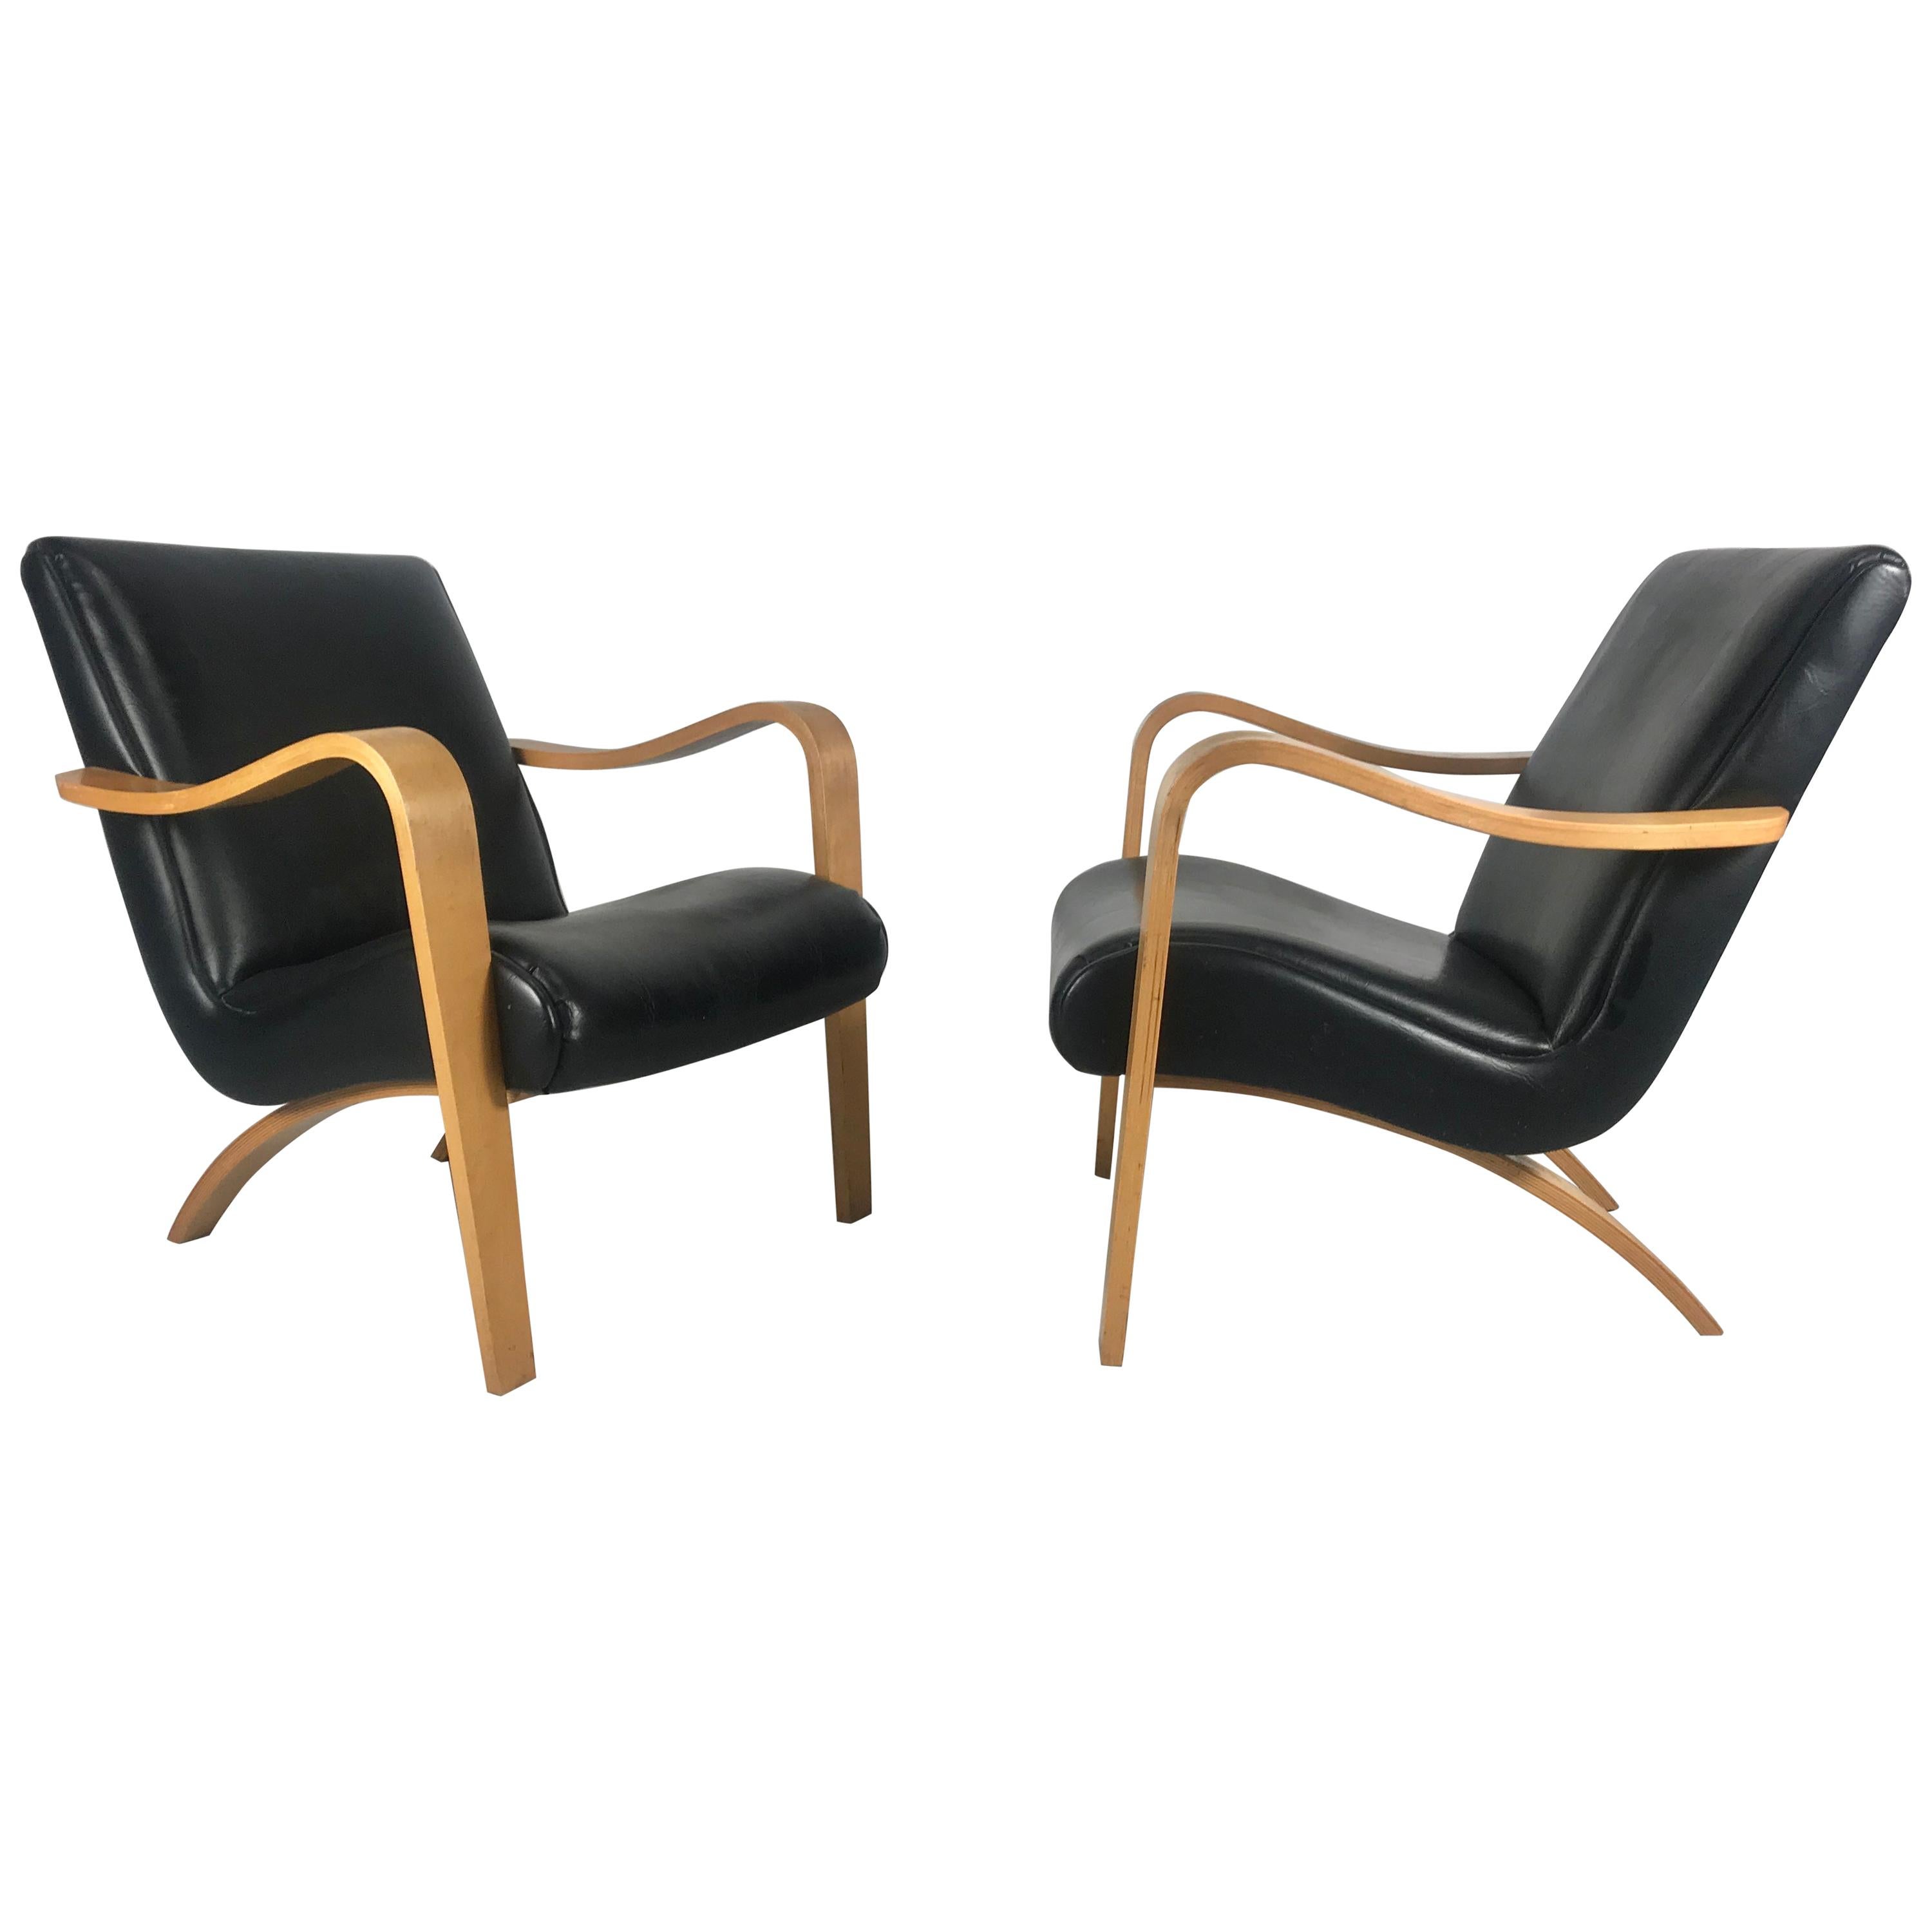 Pair of Classic Modernist Bent Plywood Arm Lounge Chairs by Thonet